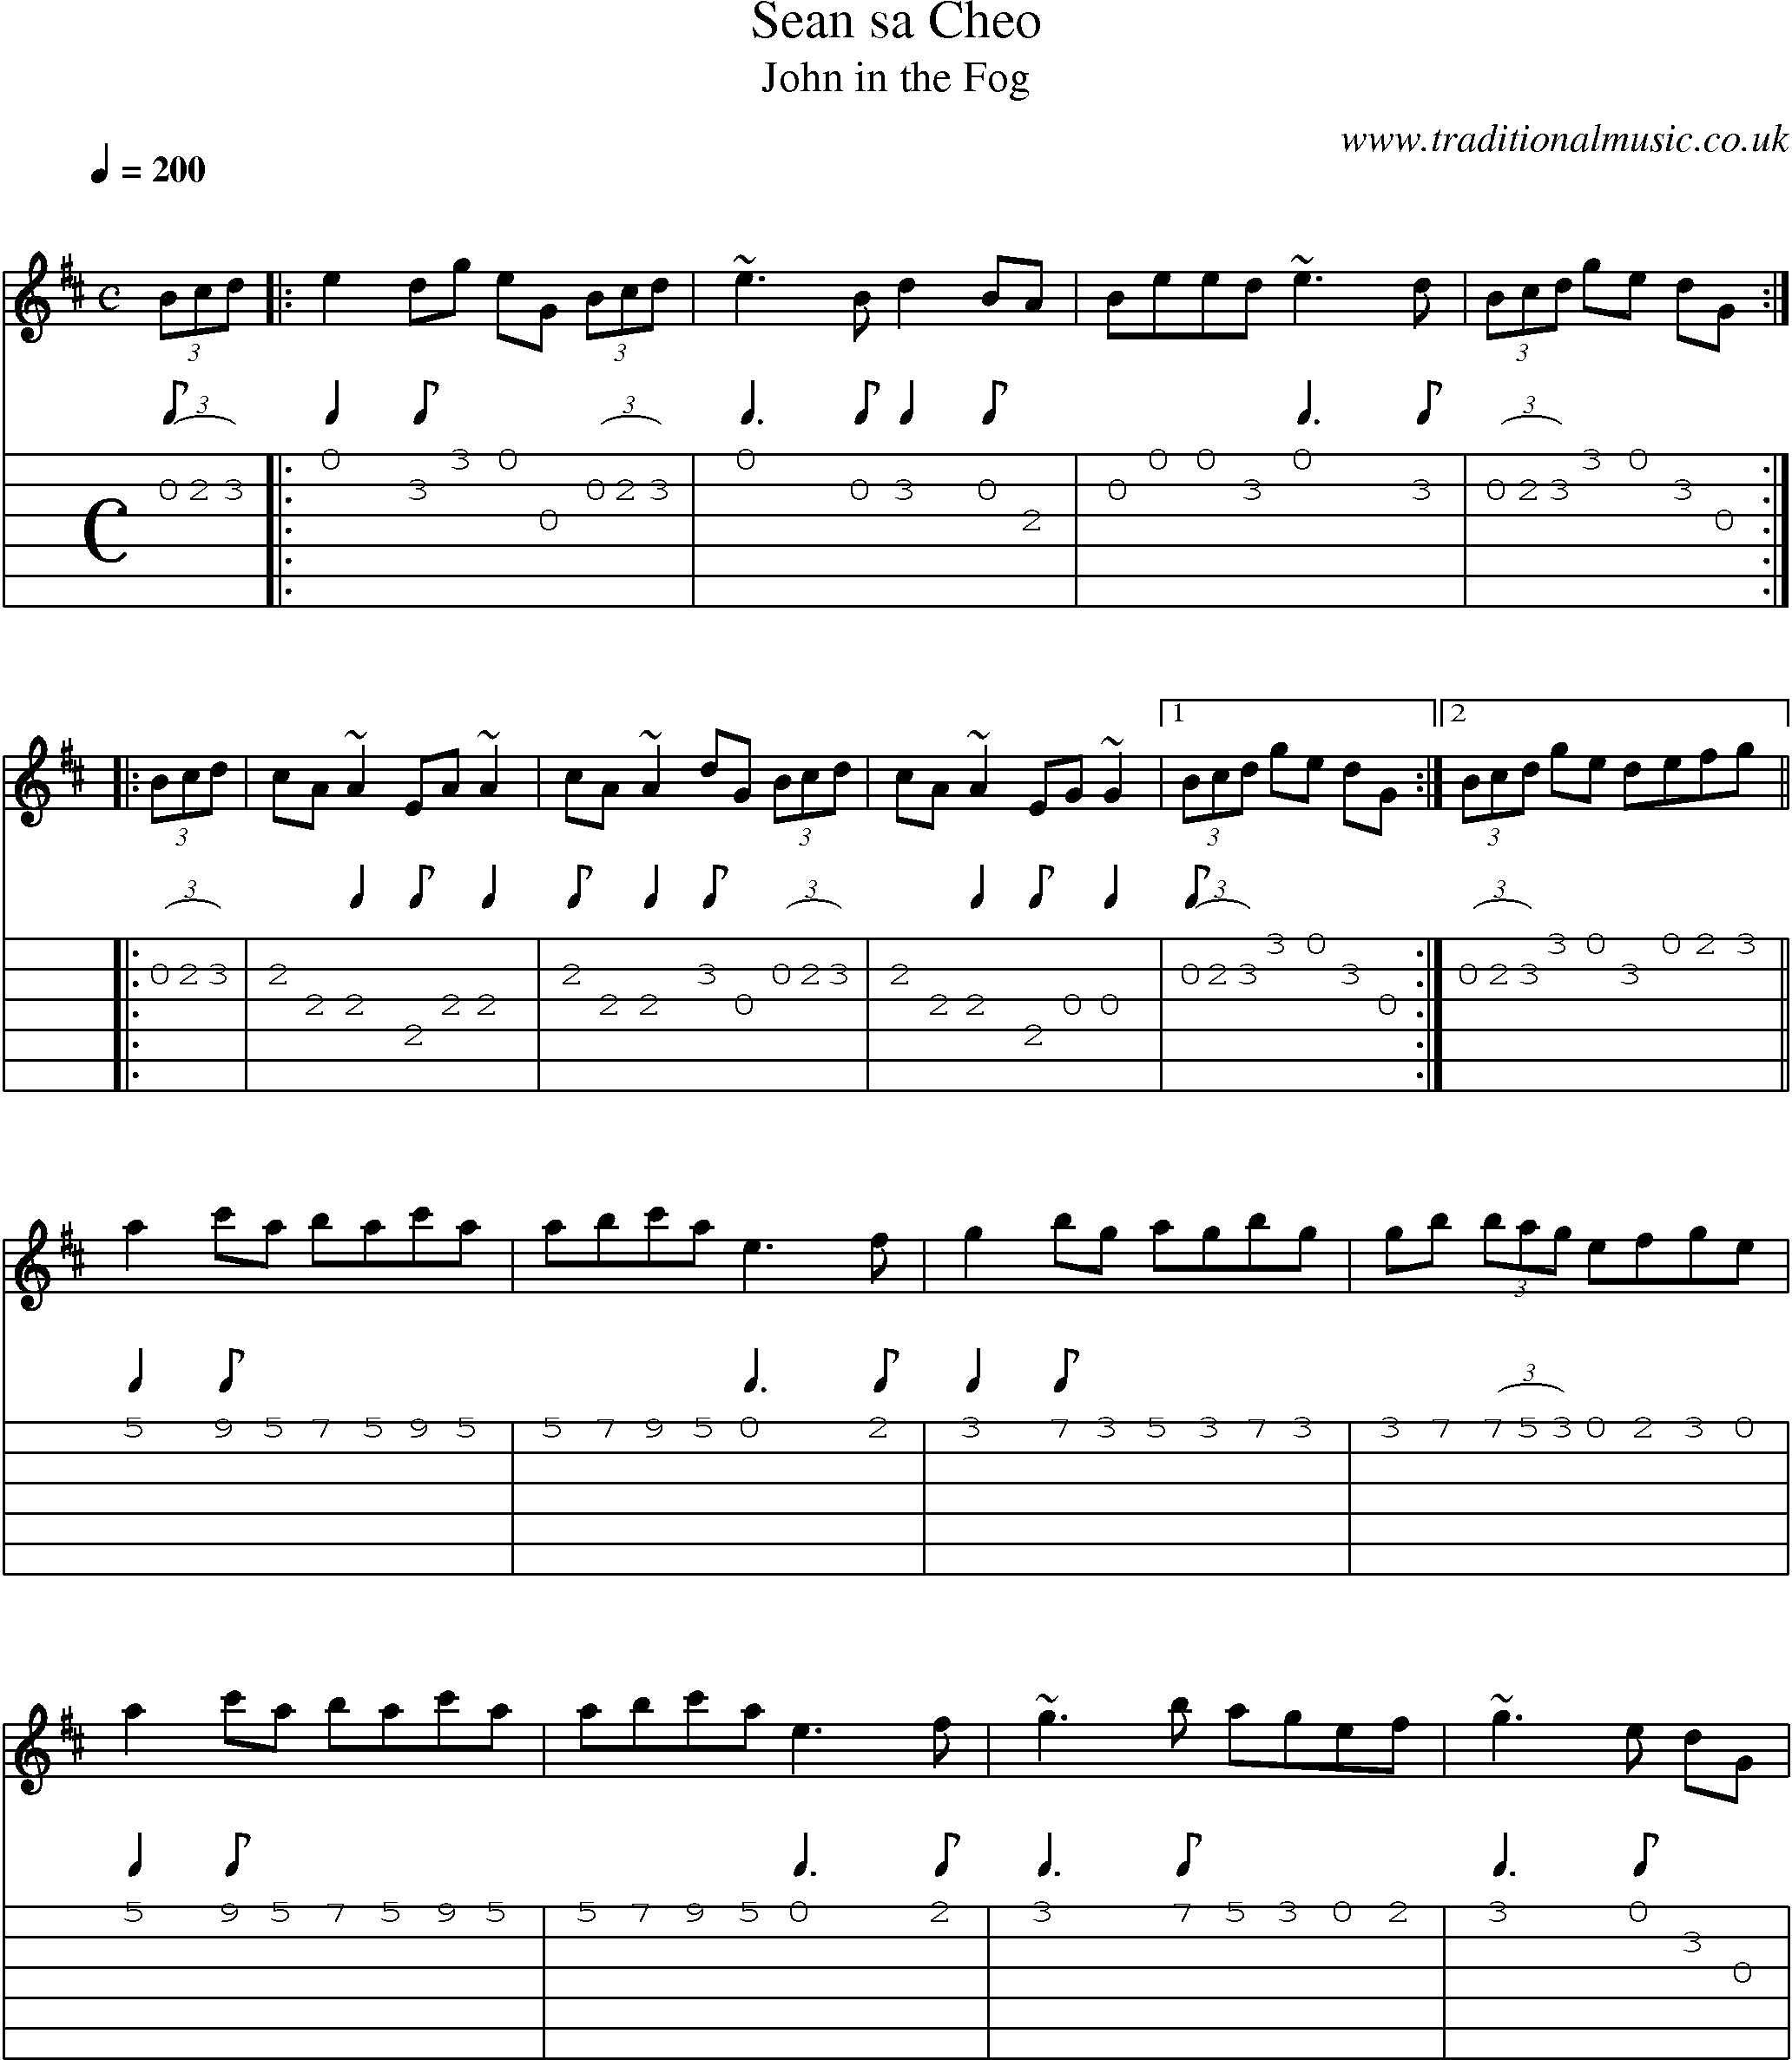 Music Score and Guitar Tabs for Sean Sa Cheo